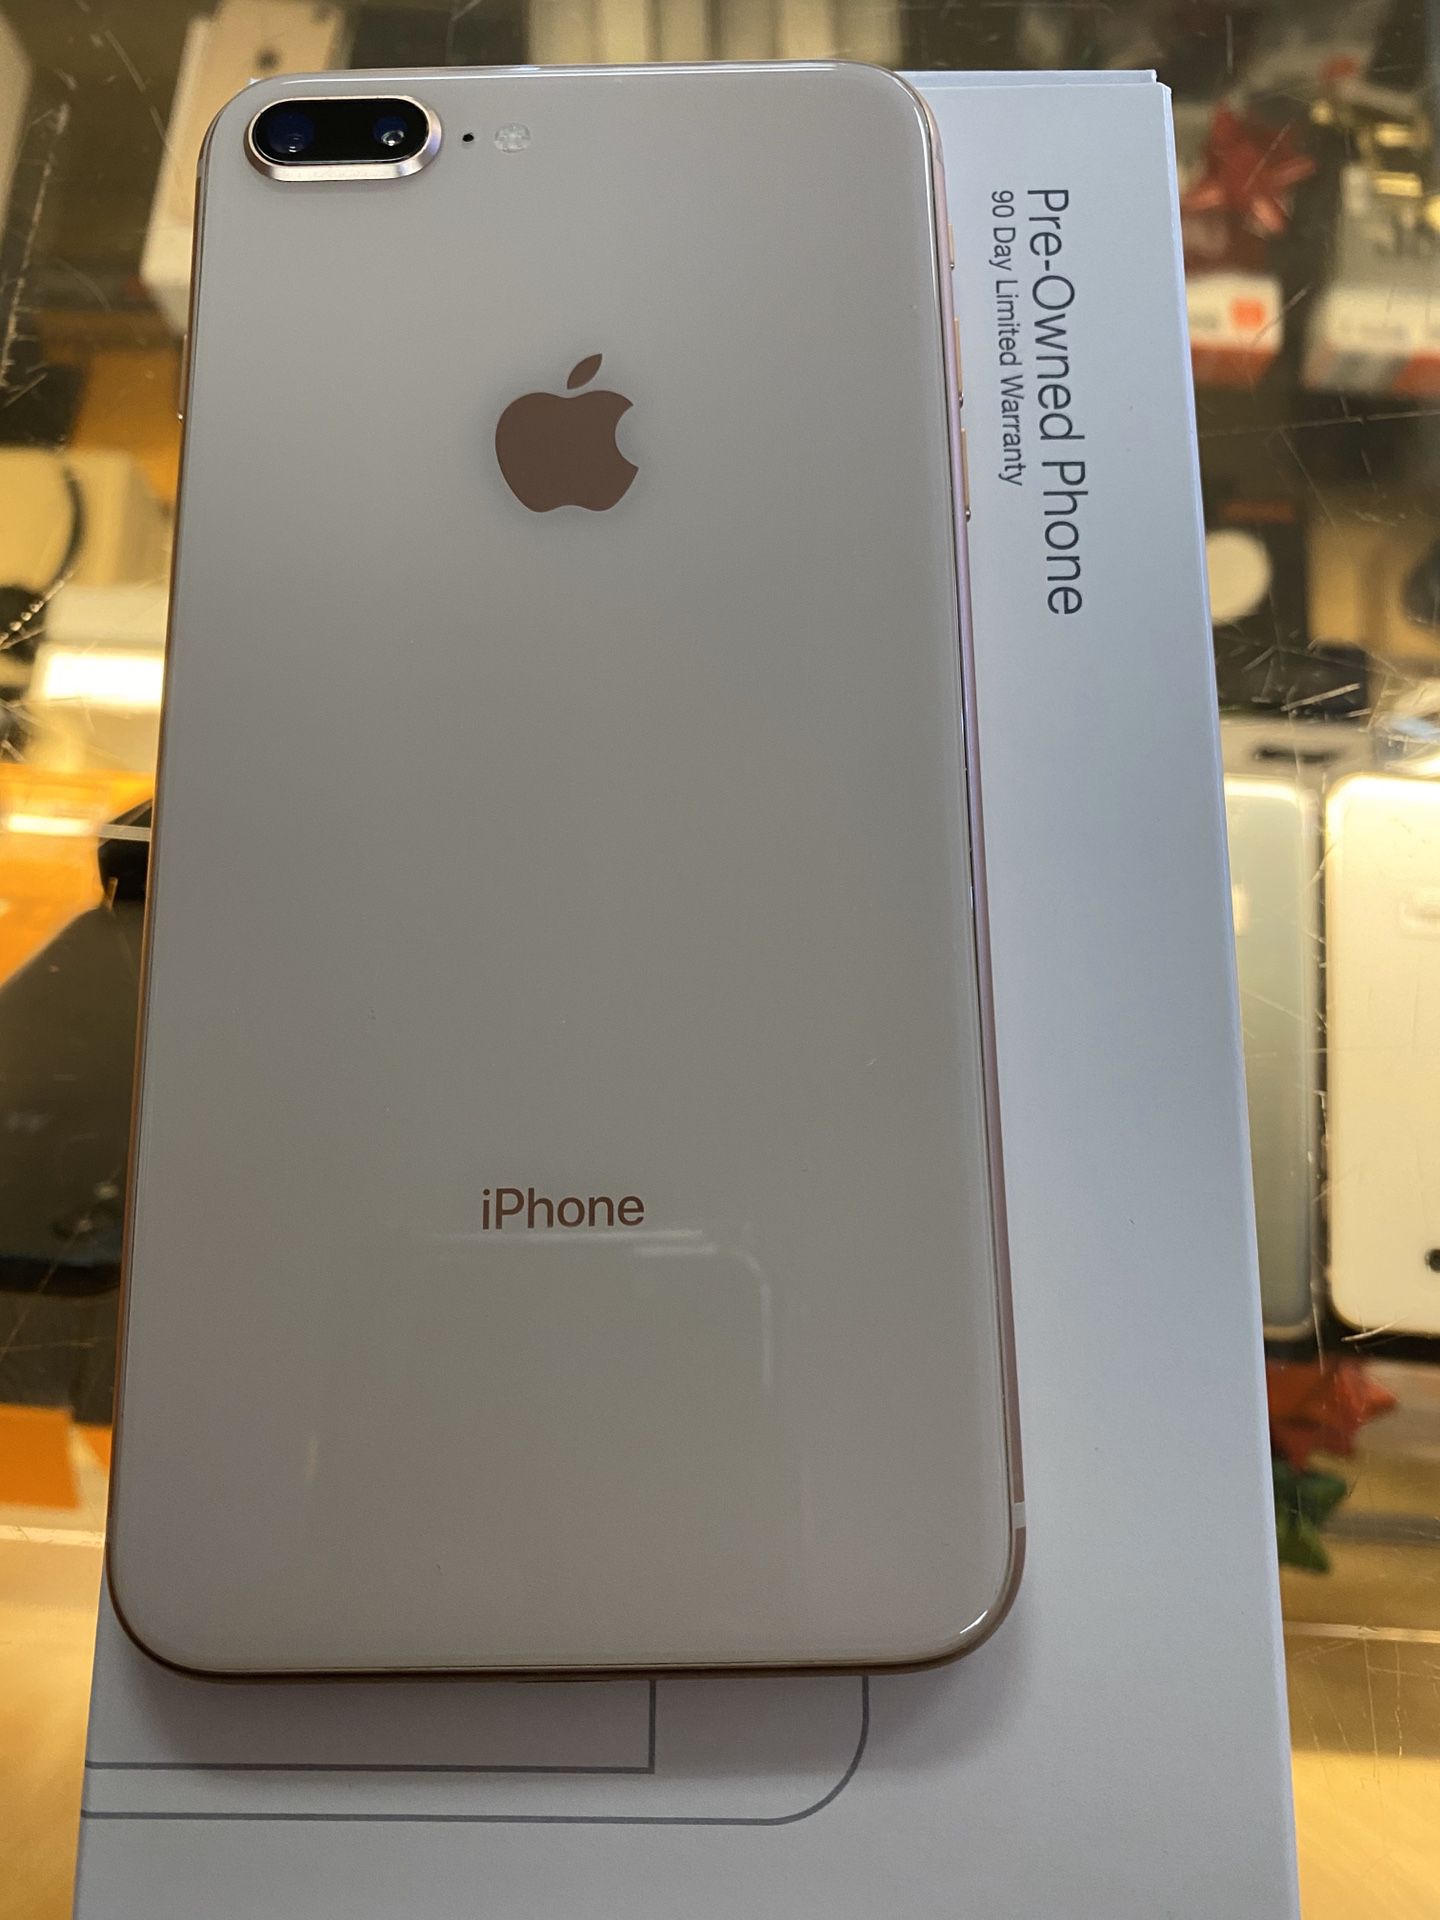 IPHONE 8 Plus pre-owned 64gb (for boost mobile only) NOT UNLOCKED. Only for new boost customers 90 day warranty through boost. GOLD! Includes first m